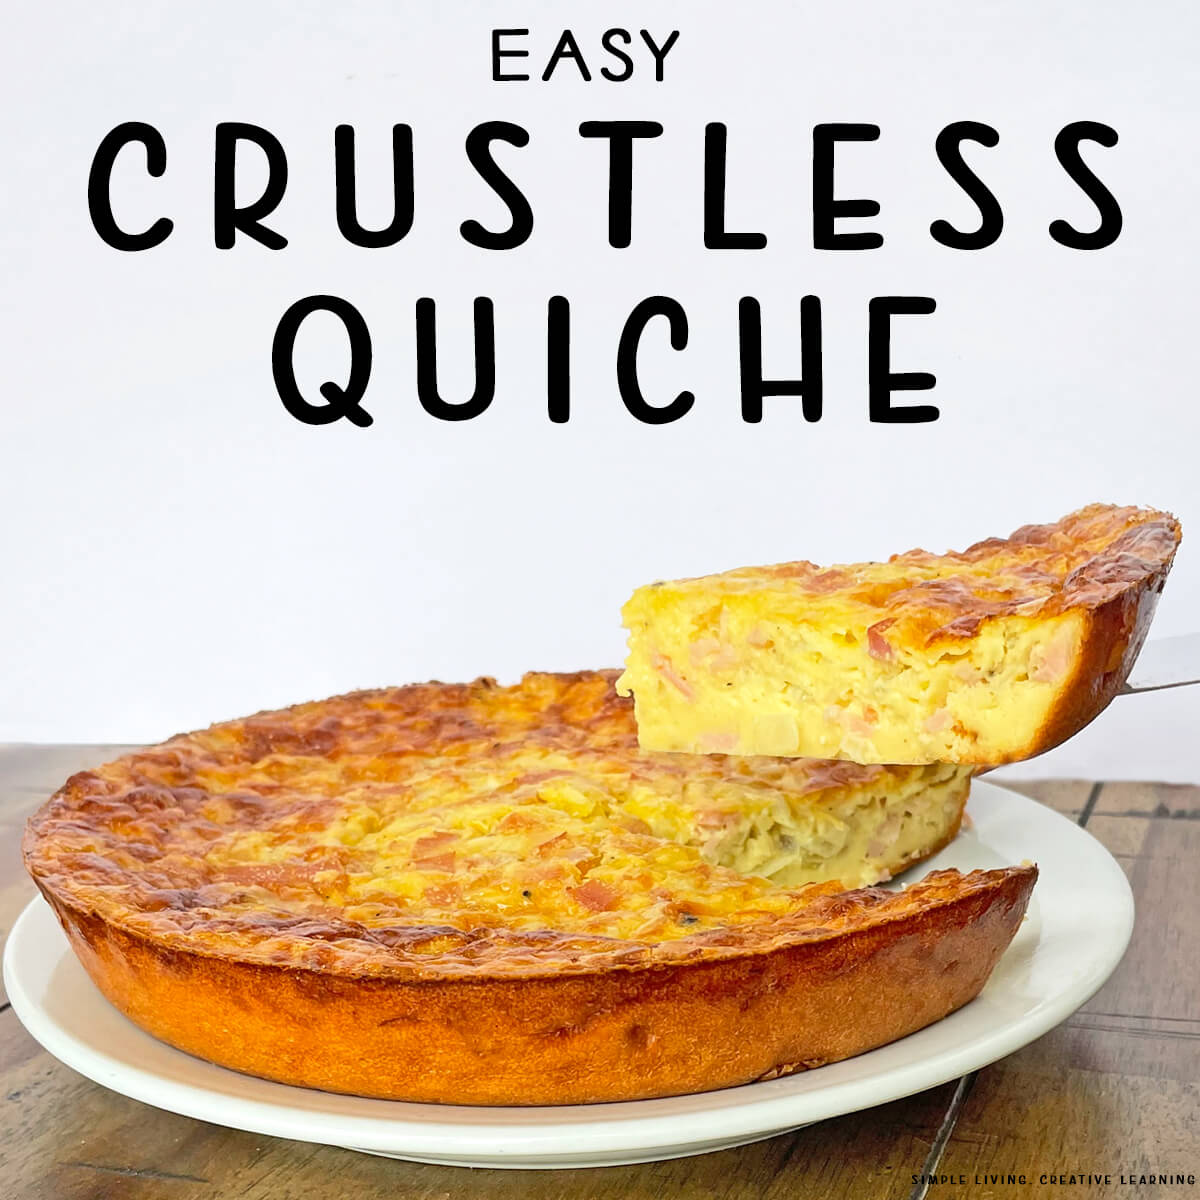 Easy Crustless Quiche Recipe on a plate with one piece cut out